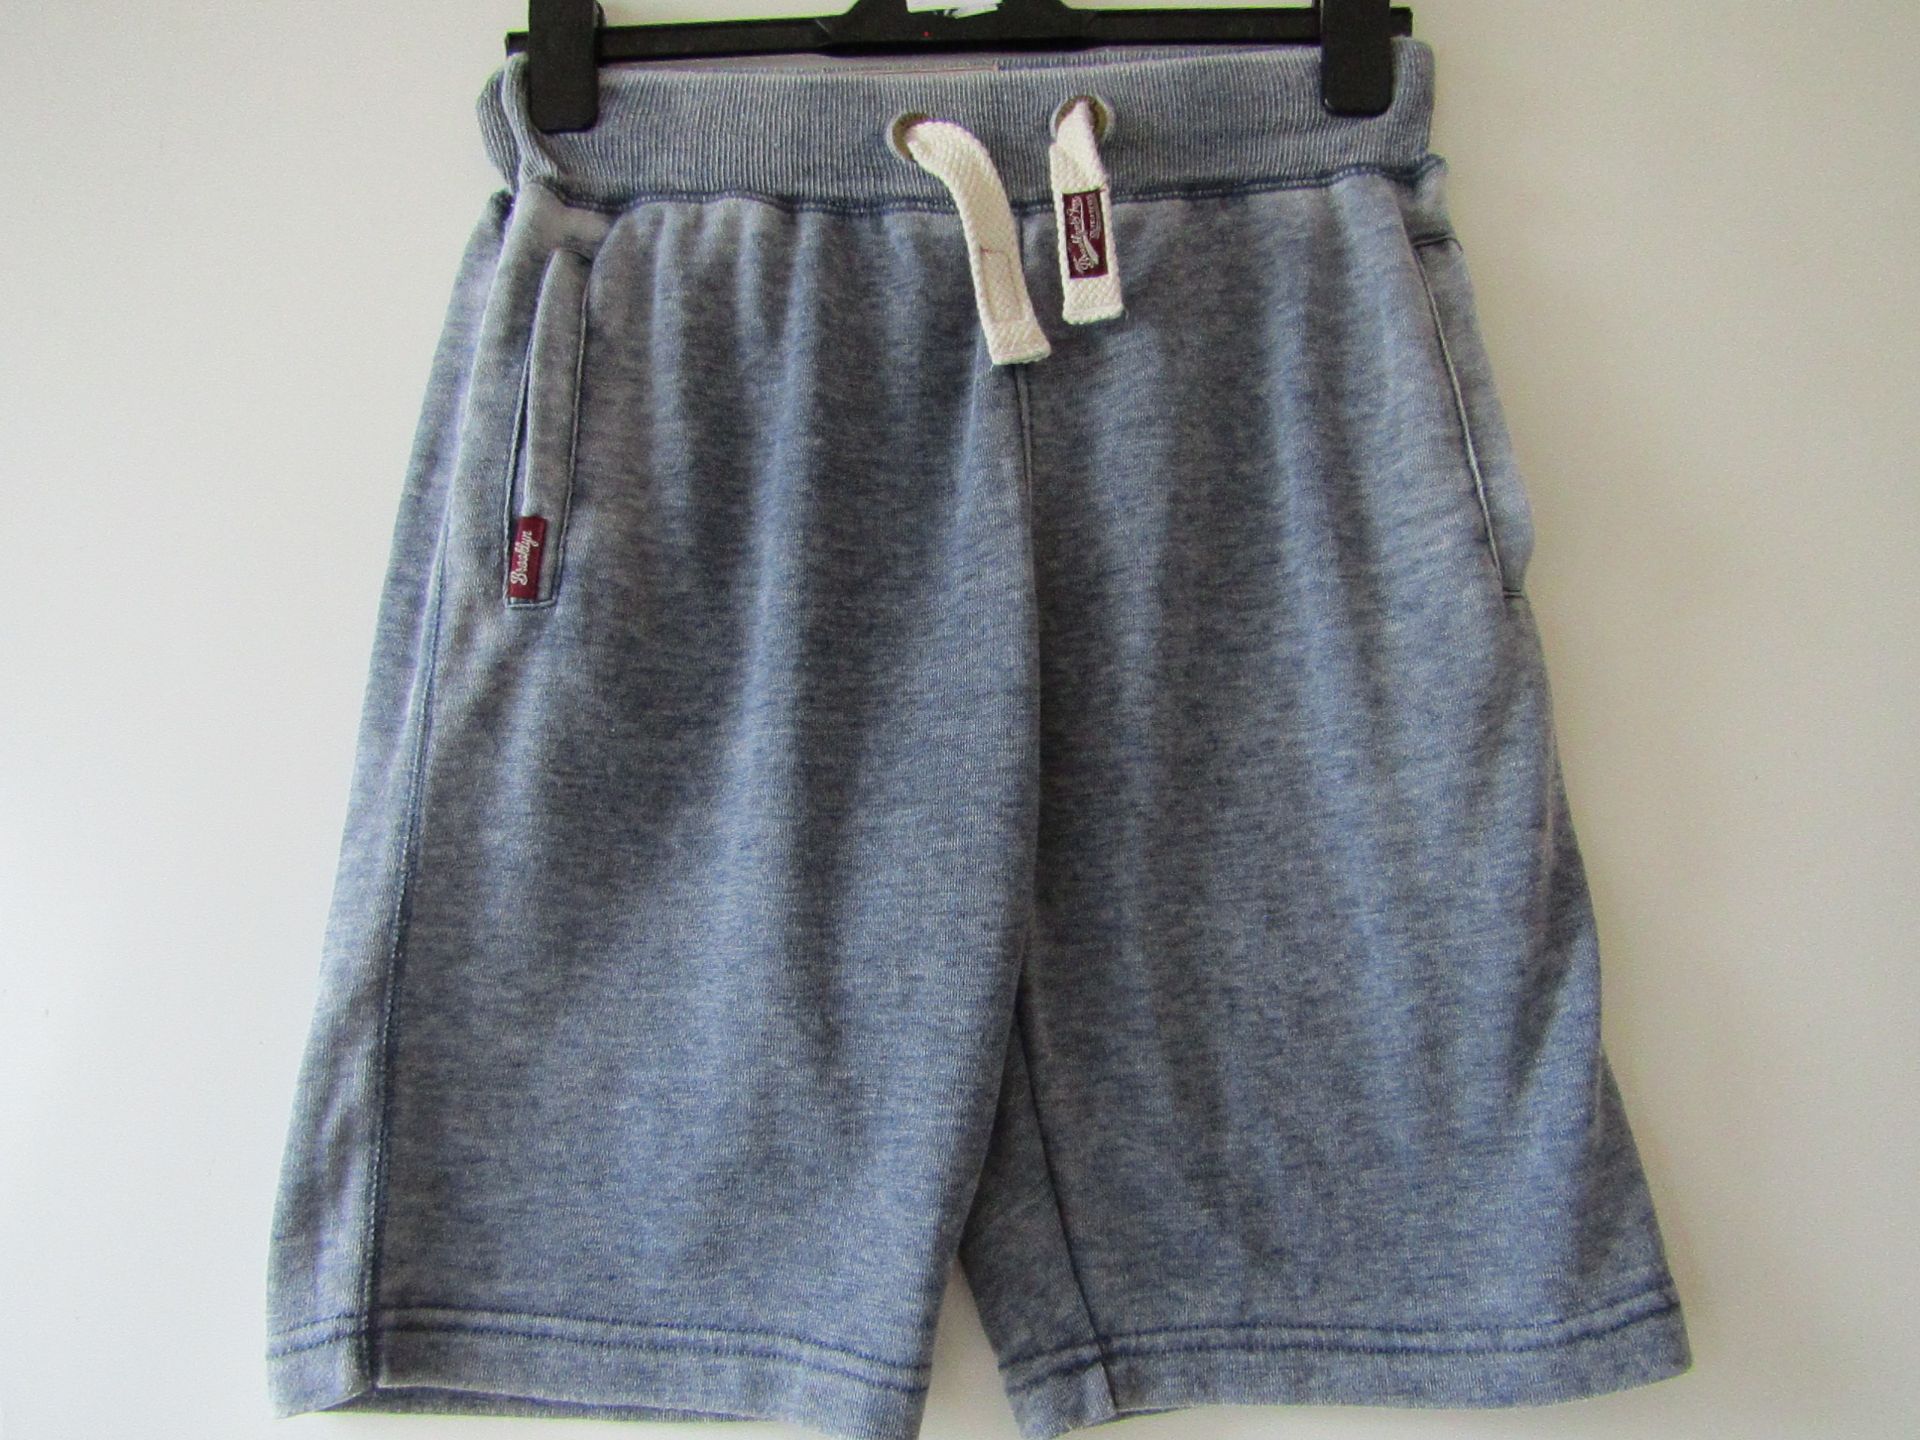 Brooklyn & Fox Outfitter Soft Touch Shorts, size S.